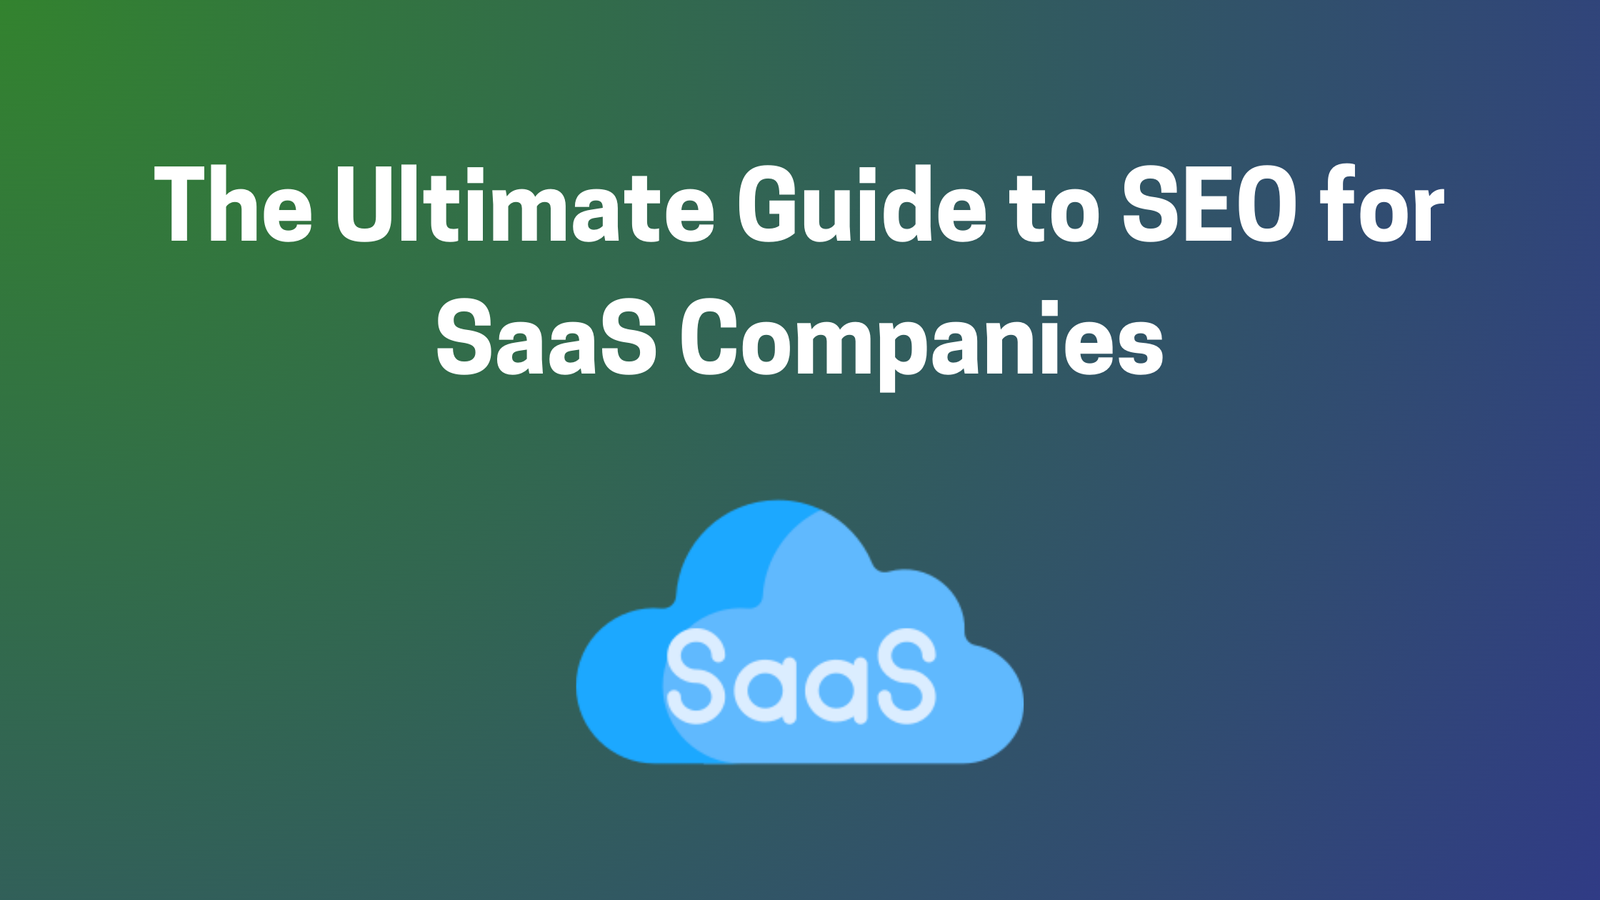 The Ultimate Guide to SEO for SaaS Companies